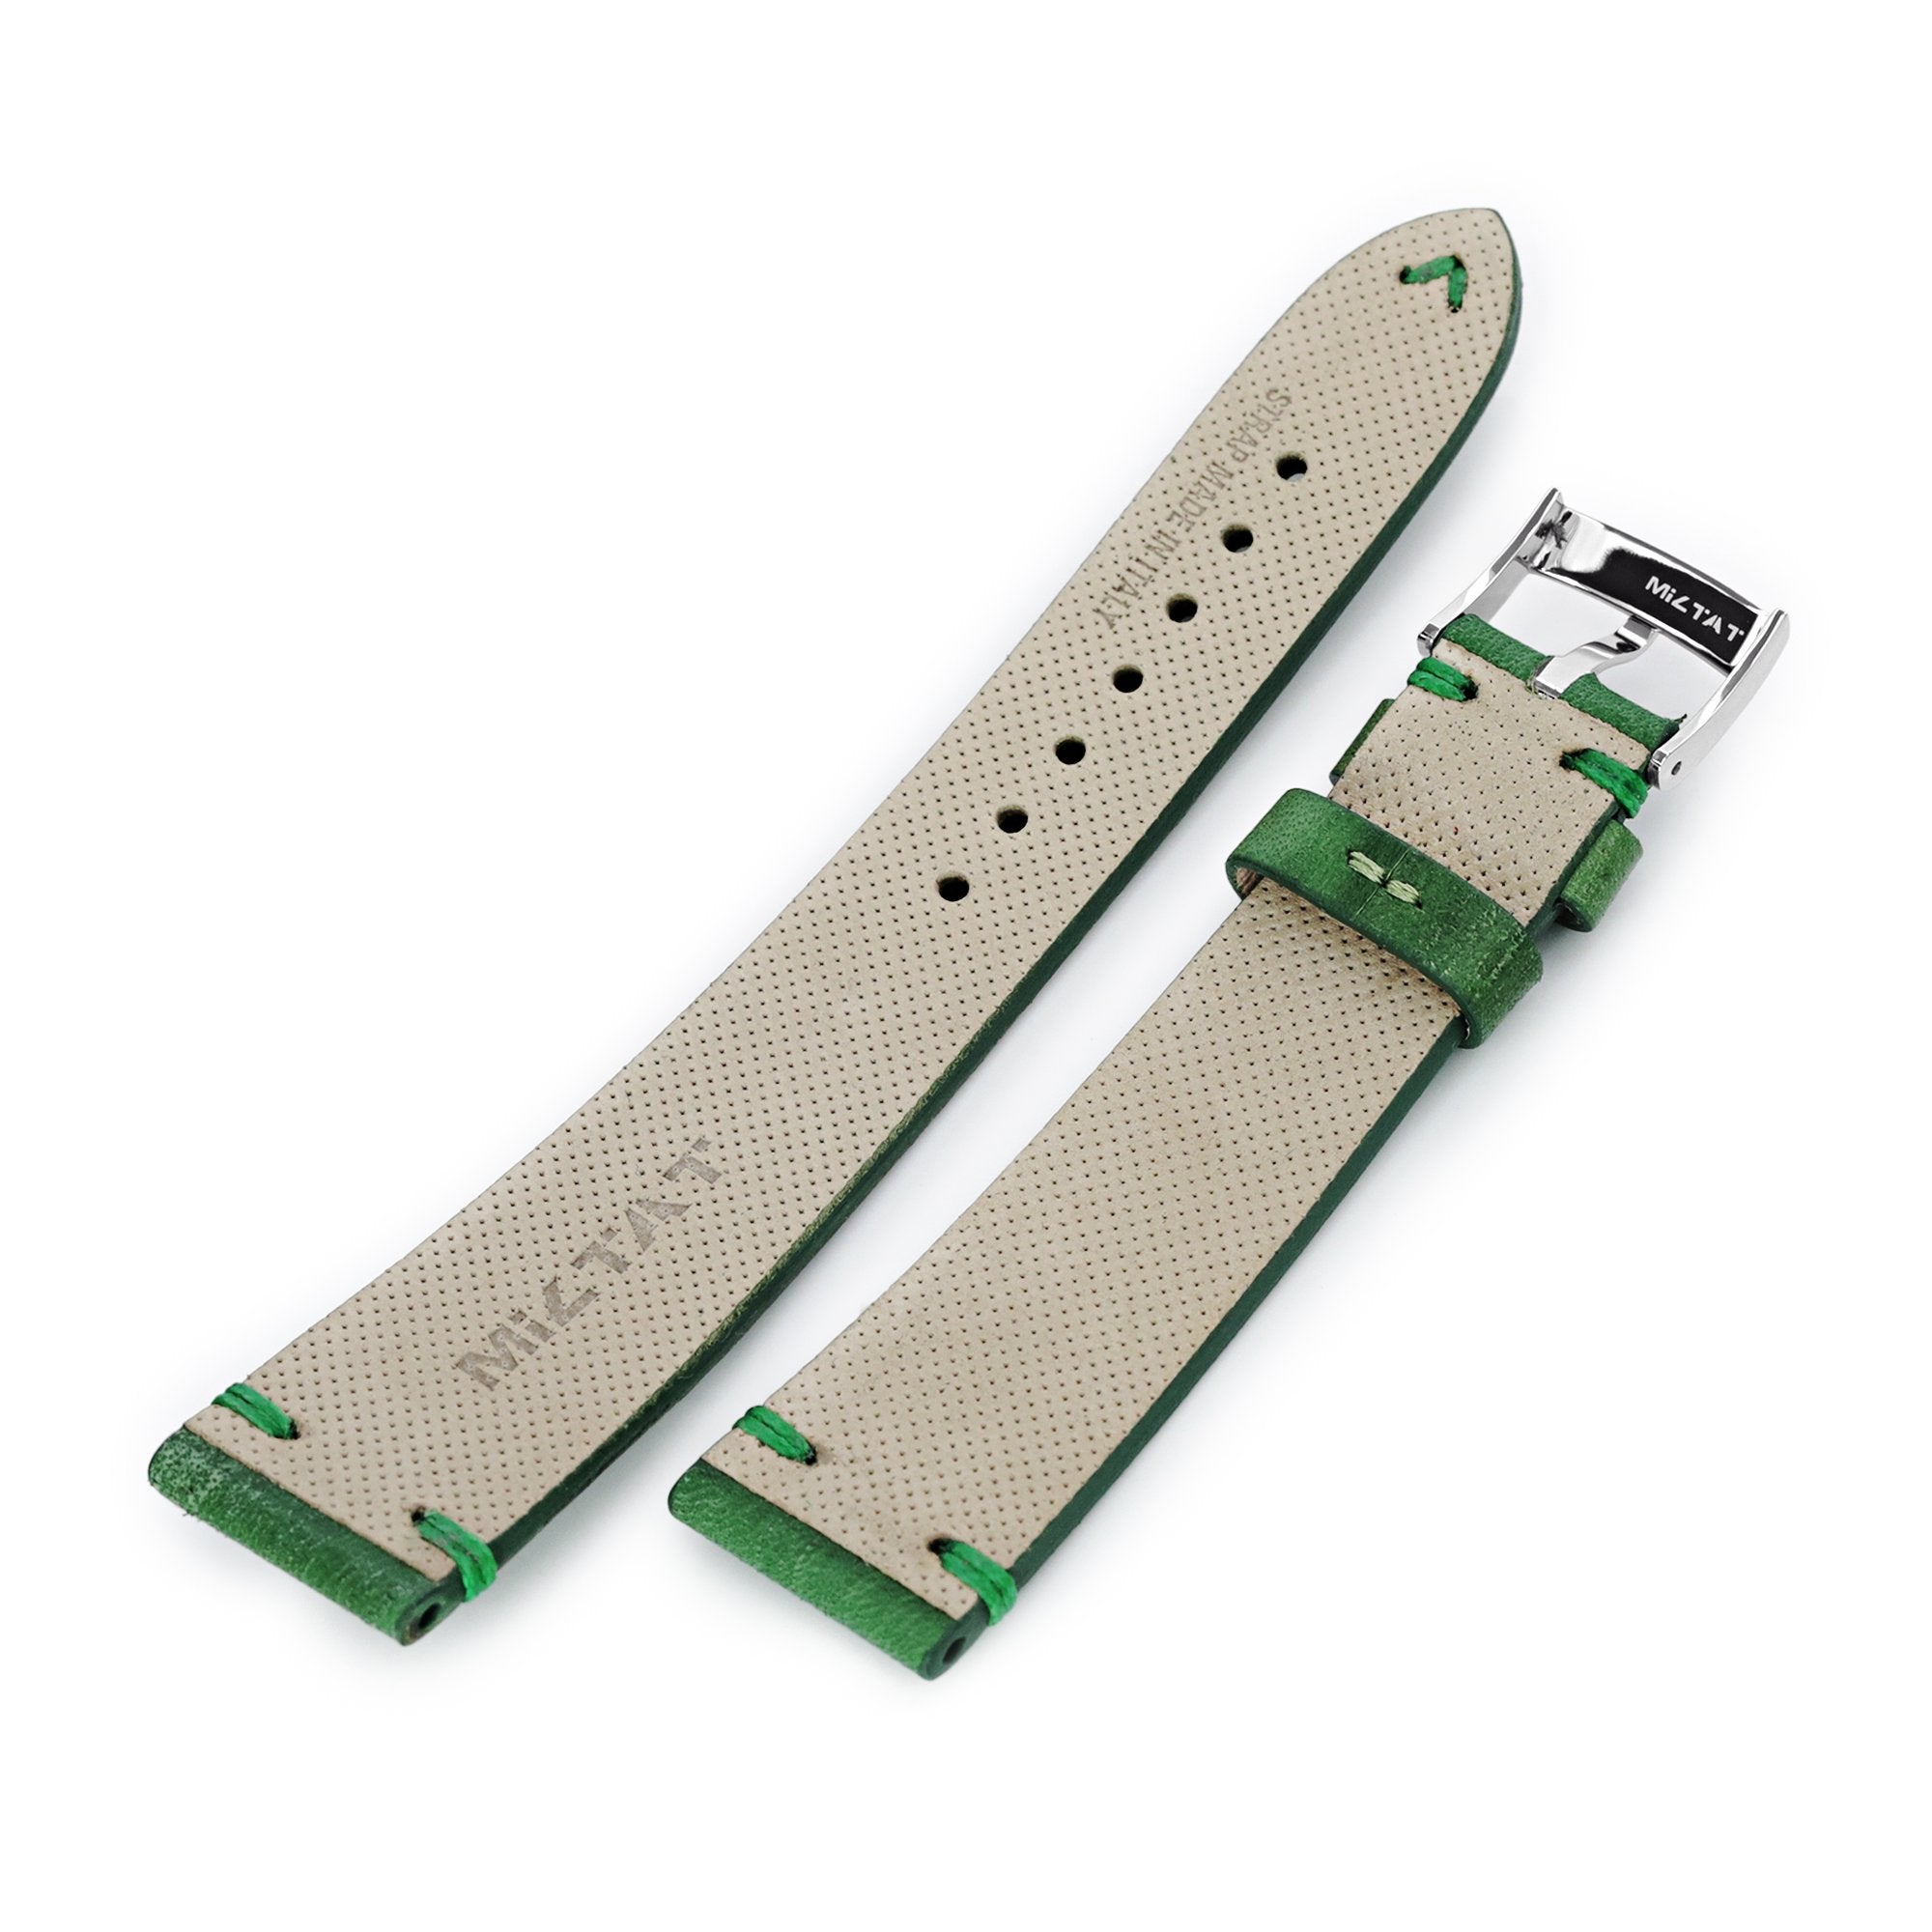 20mm Rebel Green Italian Handmade Leather of Art Watch Band, P Buckle Strapcode Watch Bands